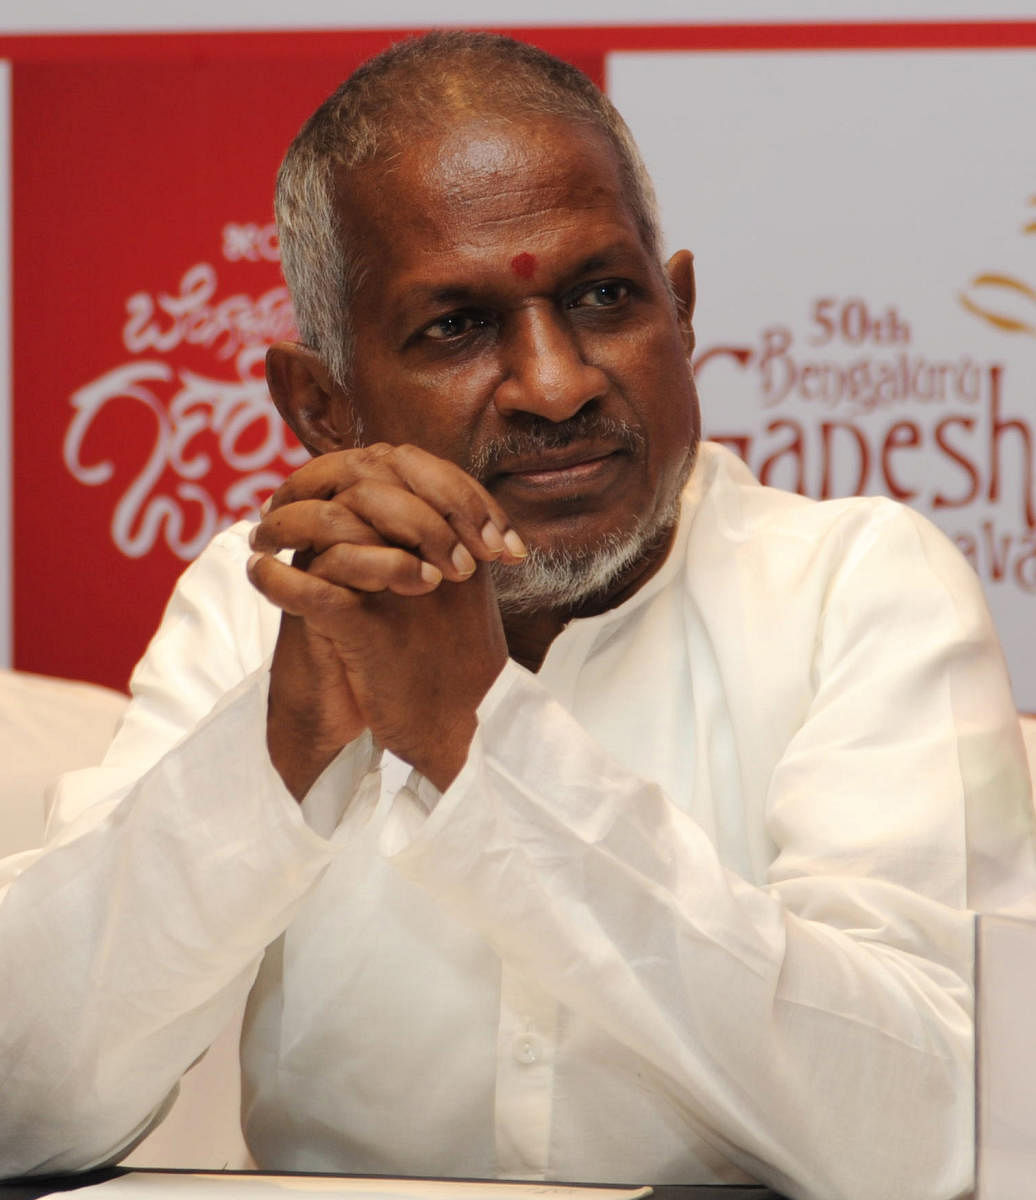 genius Ilaiyaraaja has scored music for about 1,000 films, including some hits in Kannada. He says his work so far is just pickle and papad;the real meal is coming up.